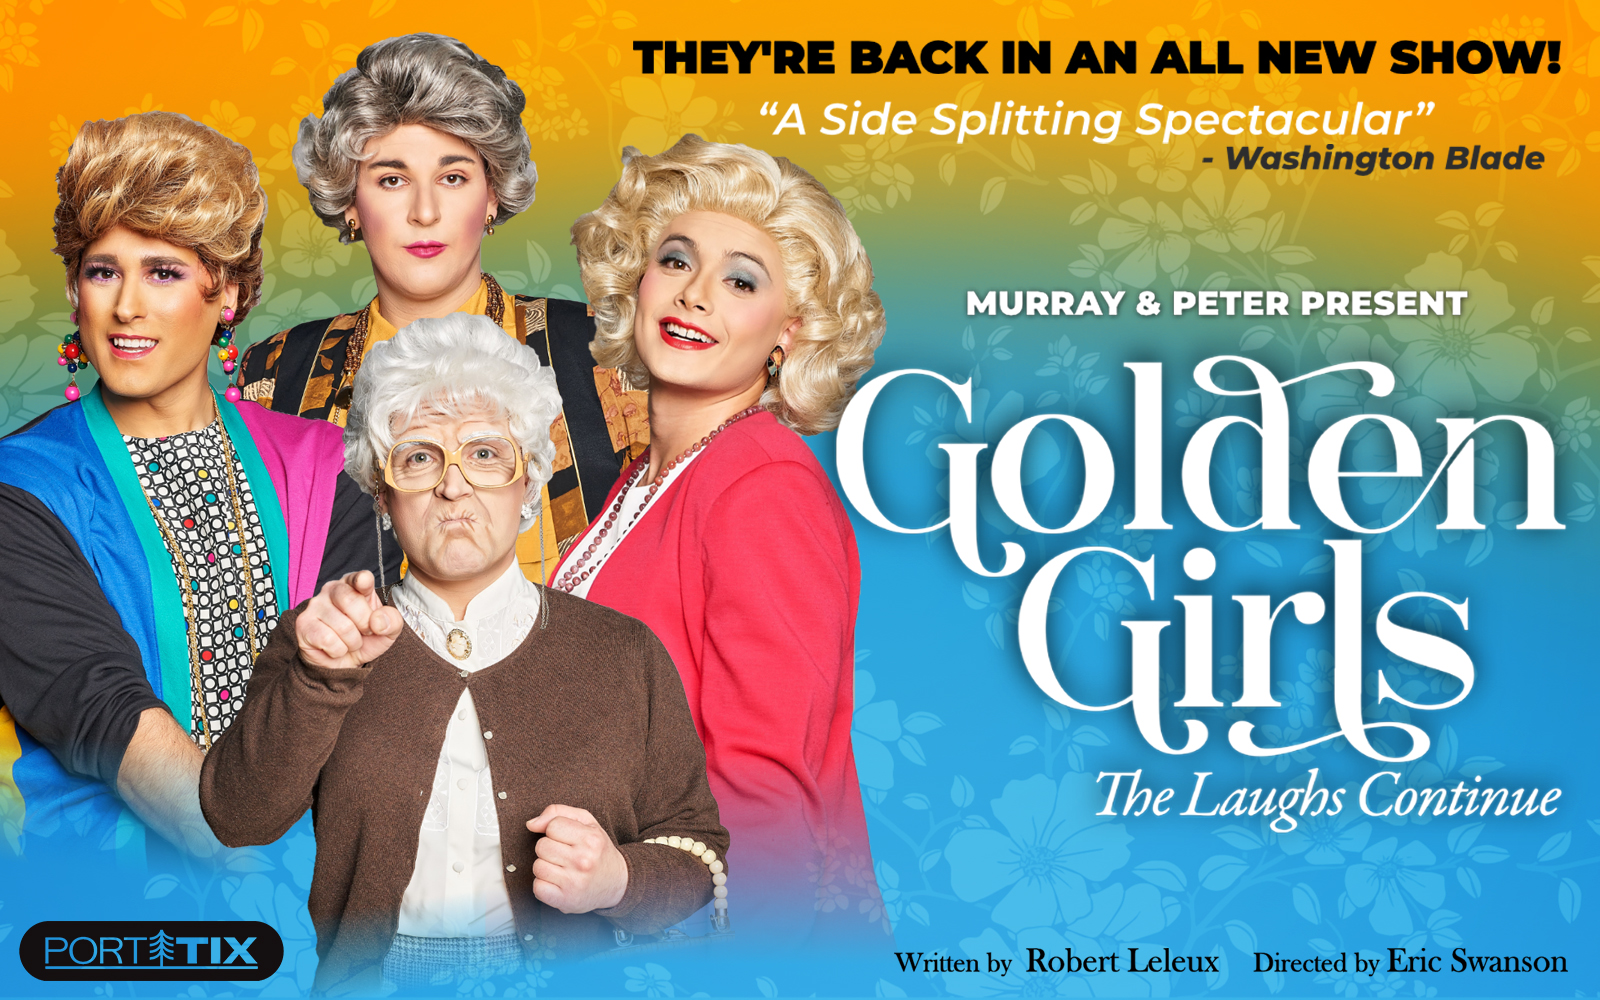 Win Tickets to The Golden Girls